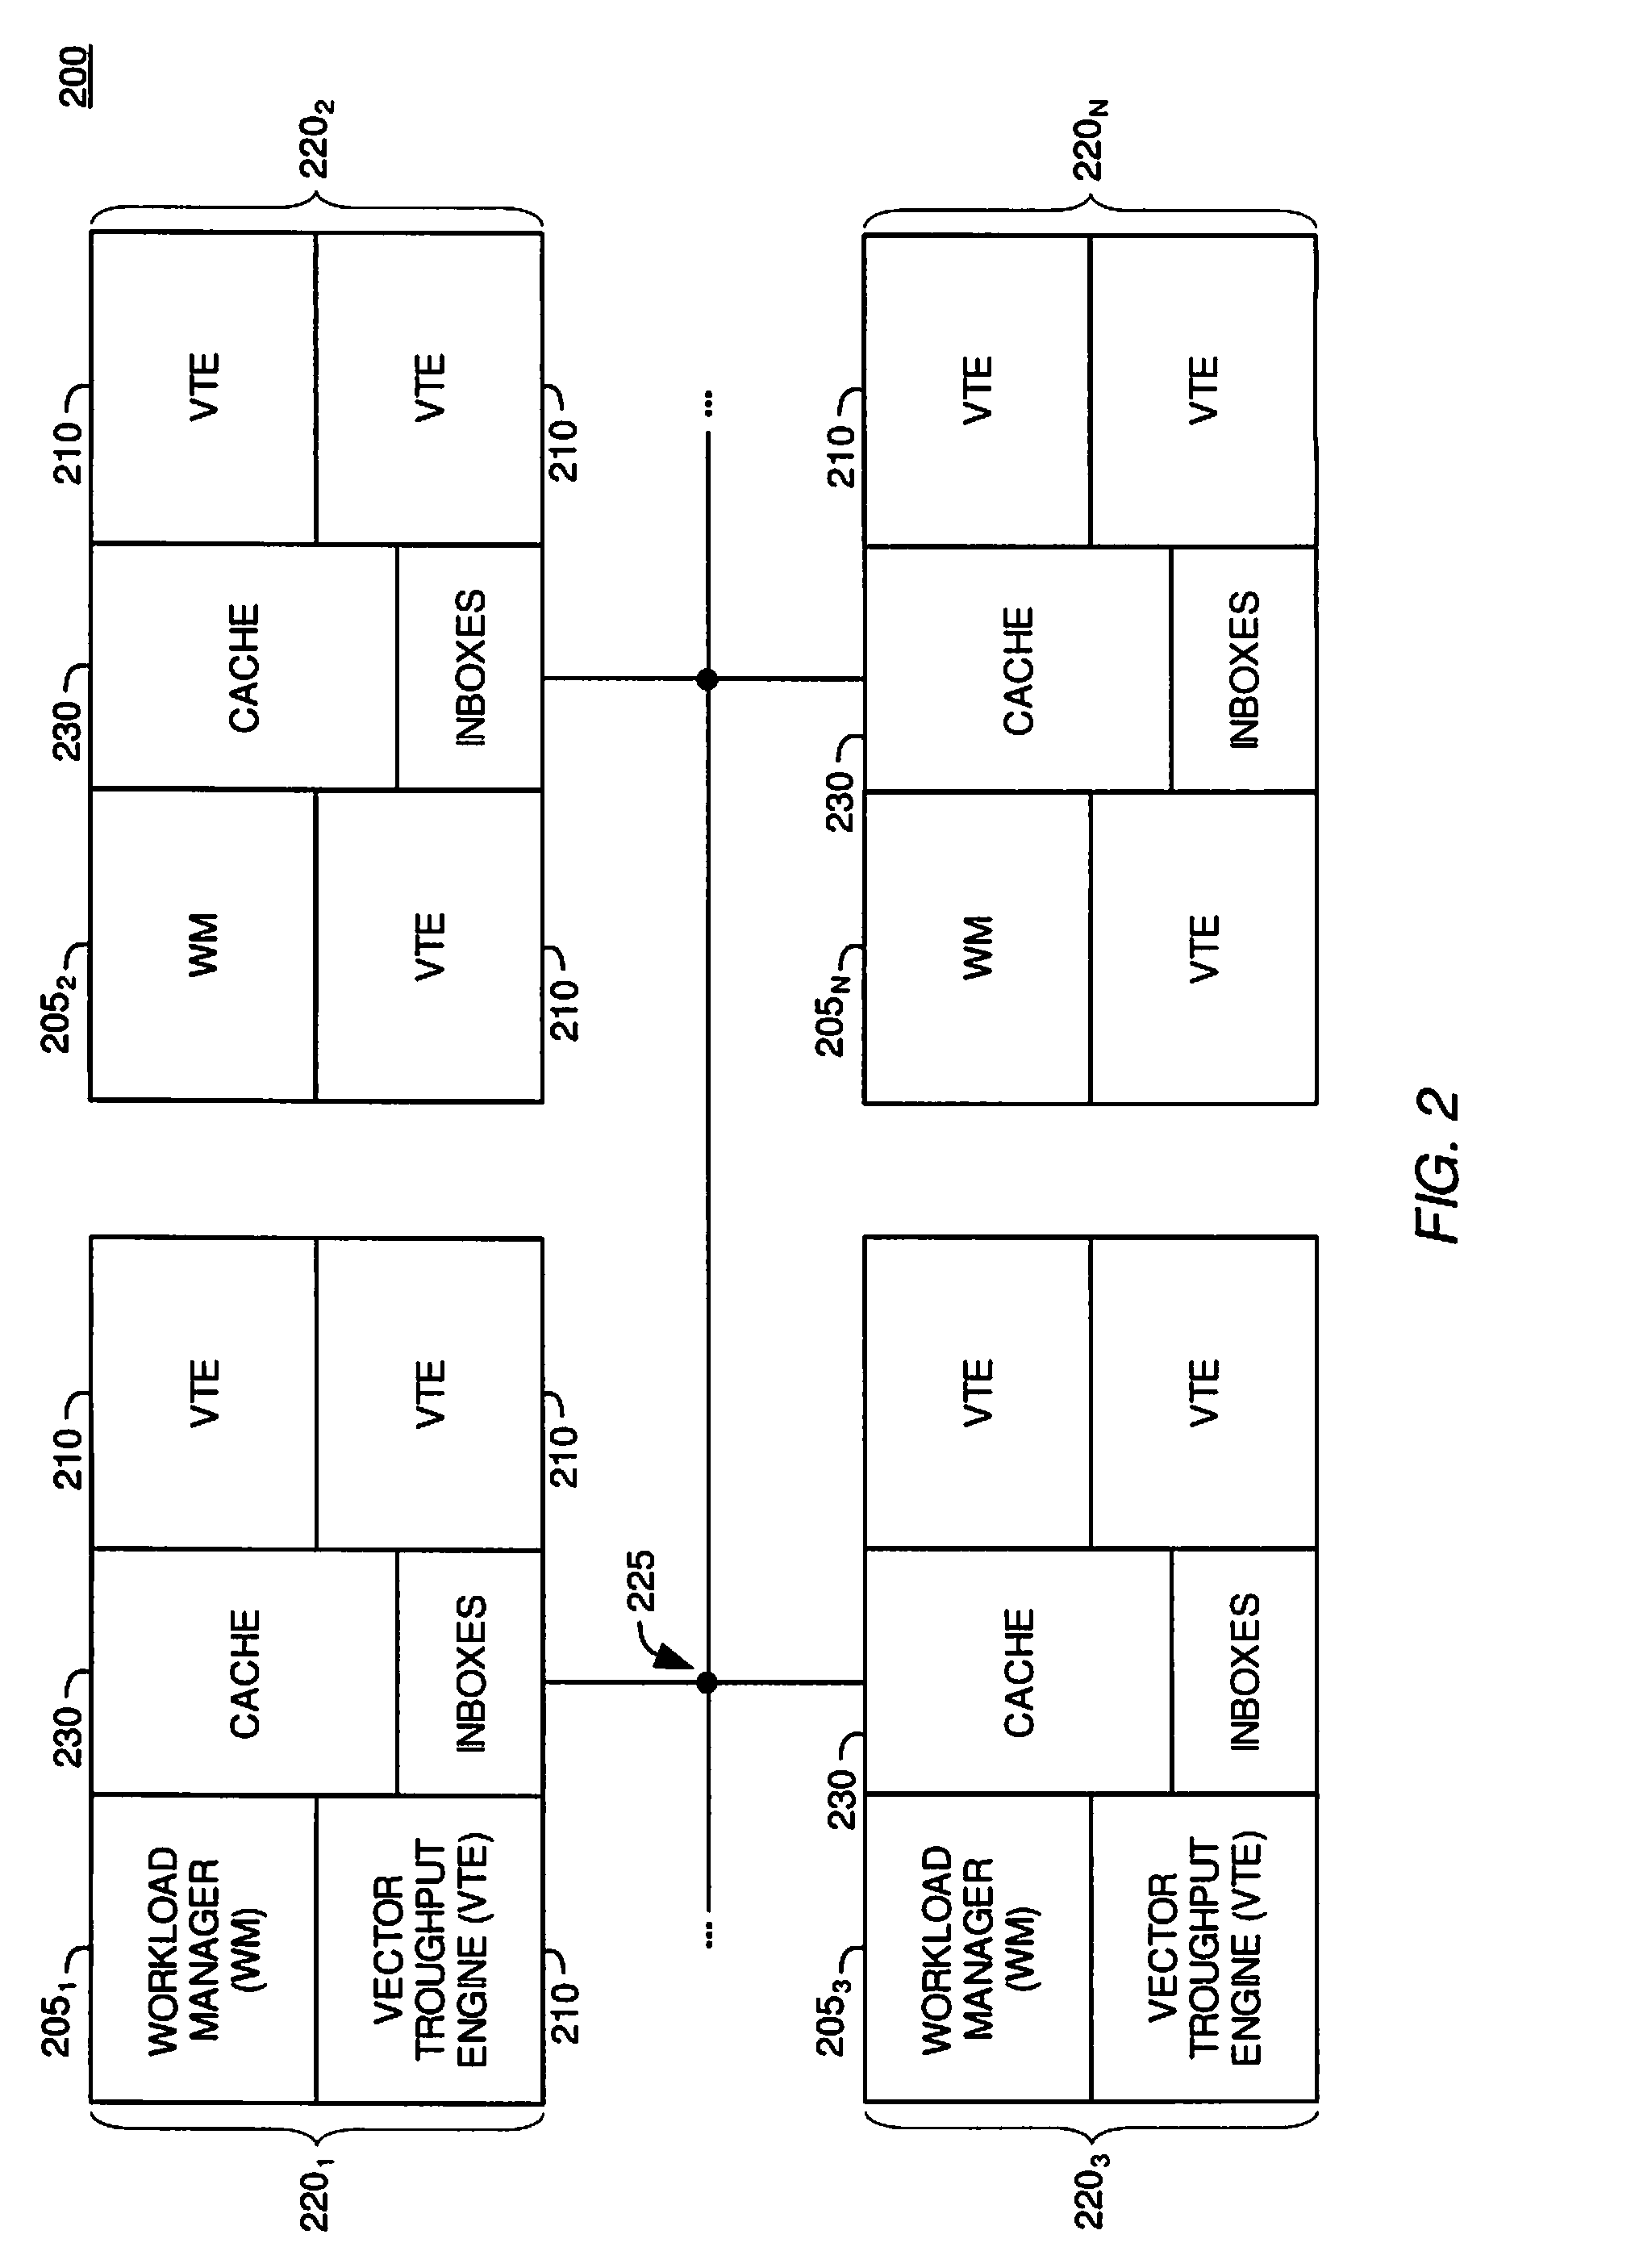 Pixel color accumulation in a ray tracing image processing system